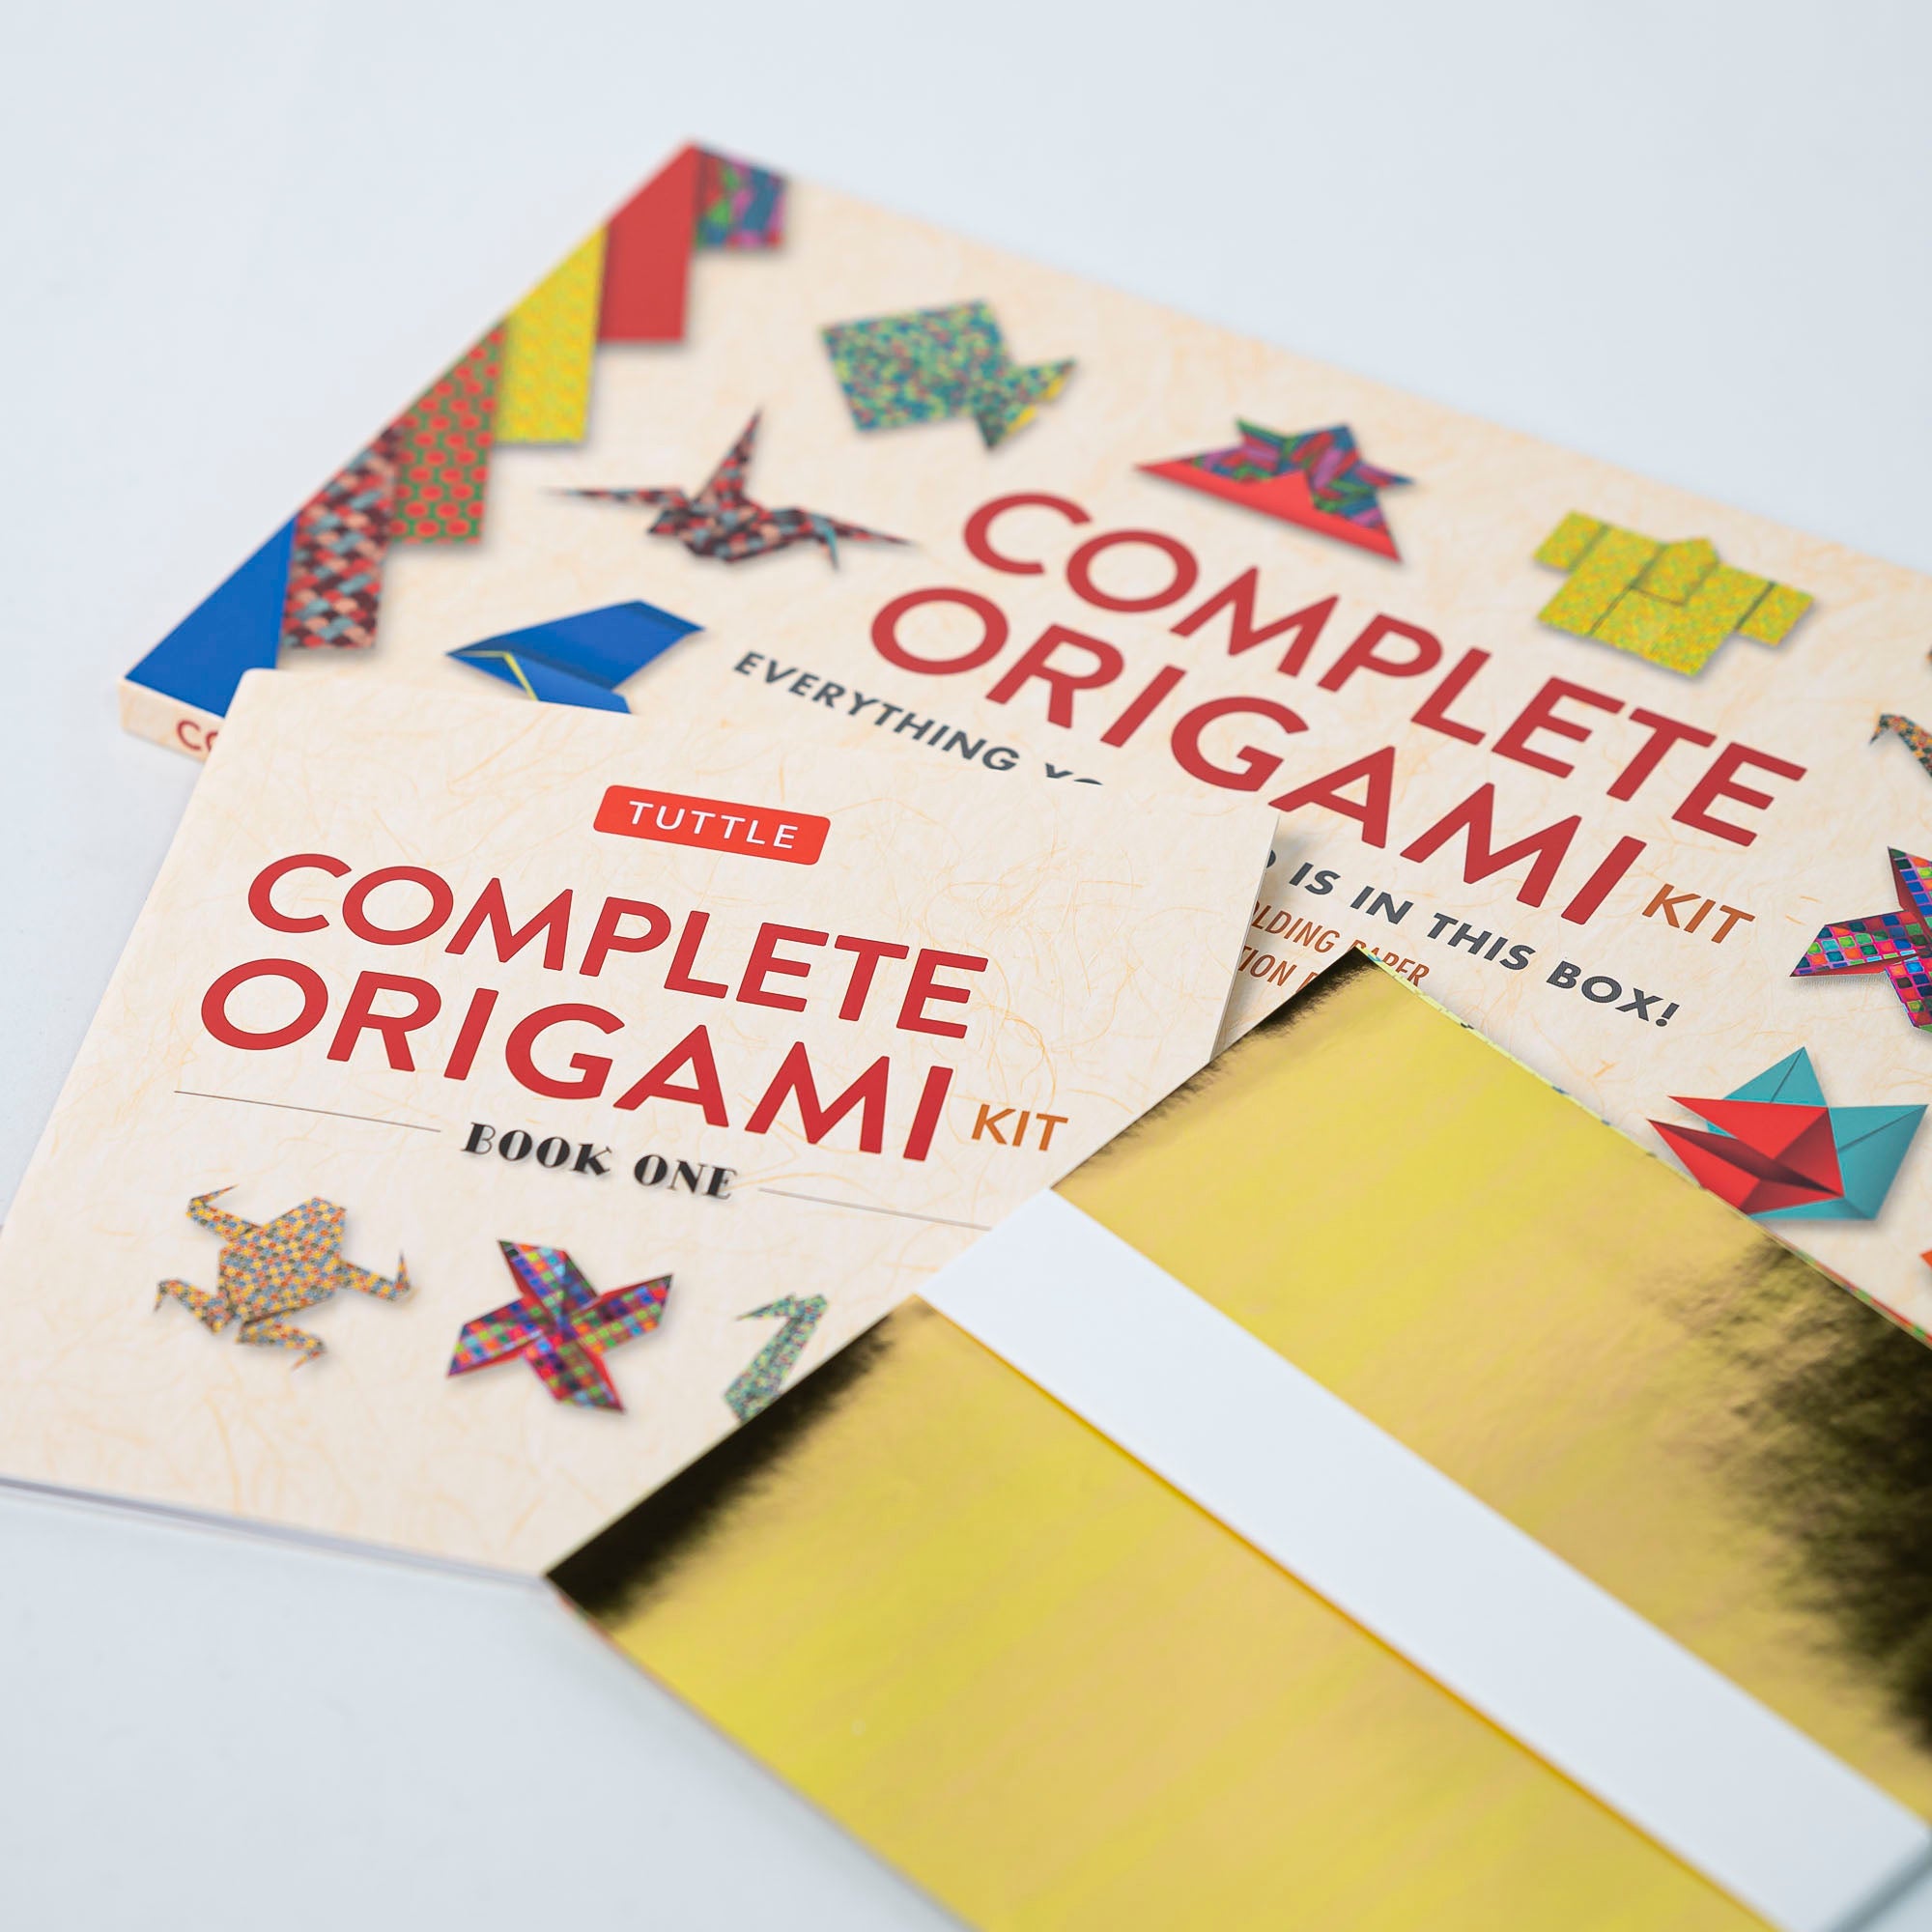 Complete Origami Kit (9780804847070)